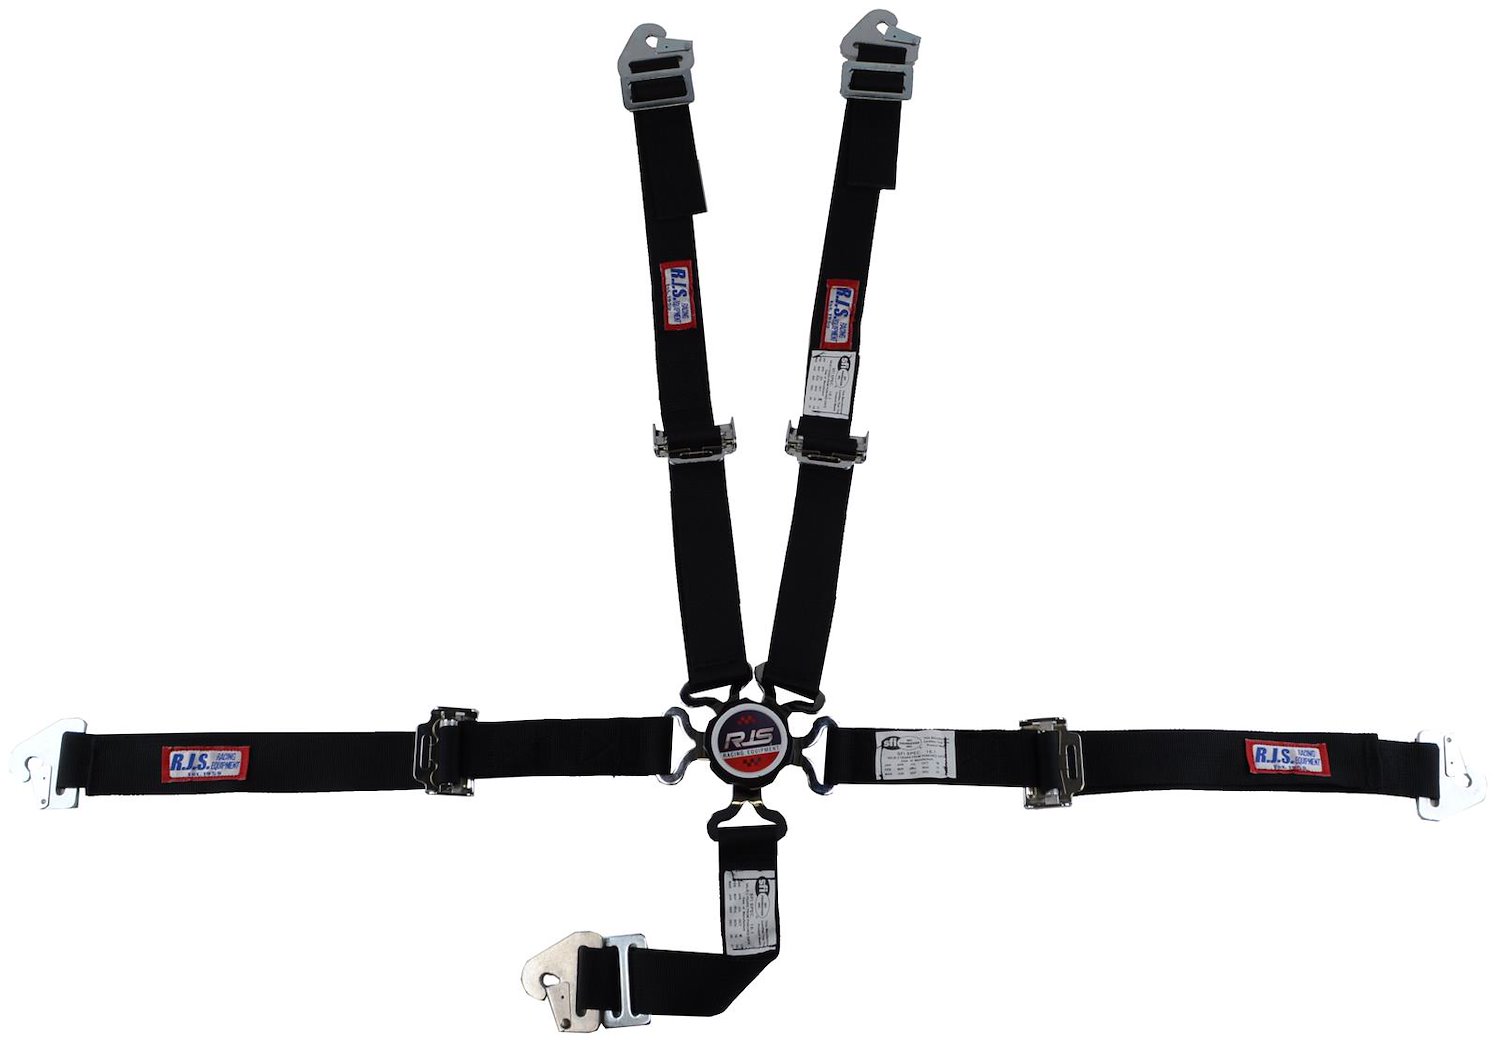 SFI 16.1 CAM-LOCK HARNESS 2 PULL UP Lap Belt 2 Shoulder Harness Individual FLOOR Mount 2 DOUBLESub ALL WRAP ENDS HOT PINK